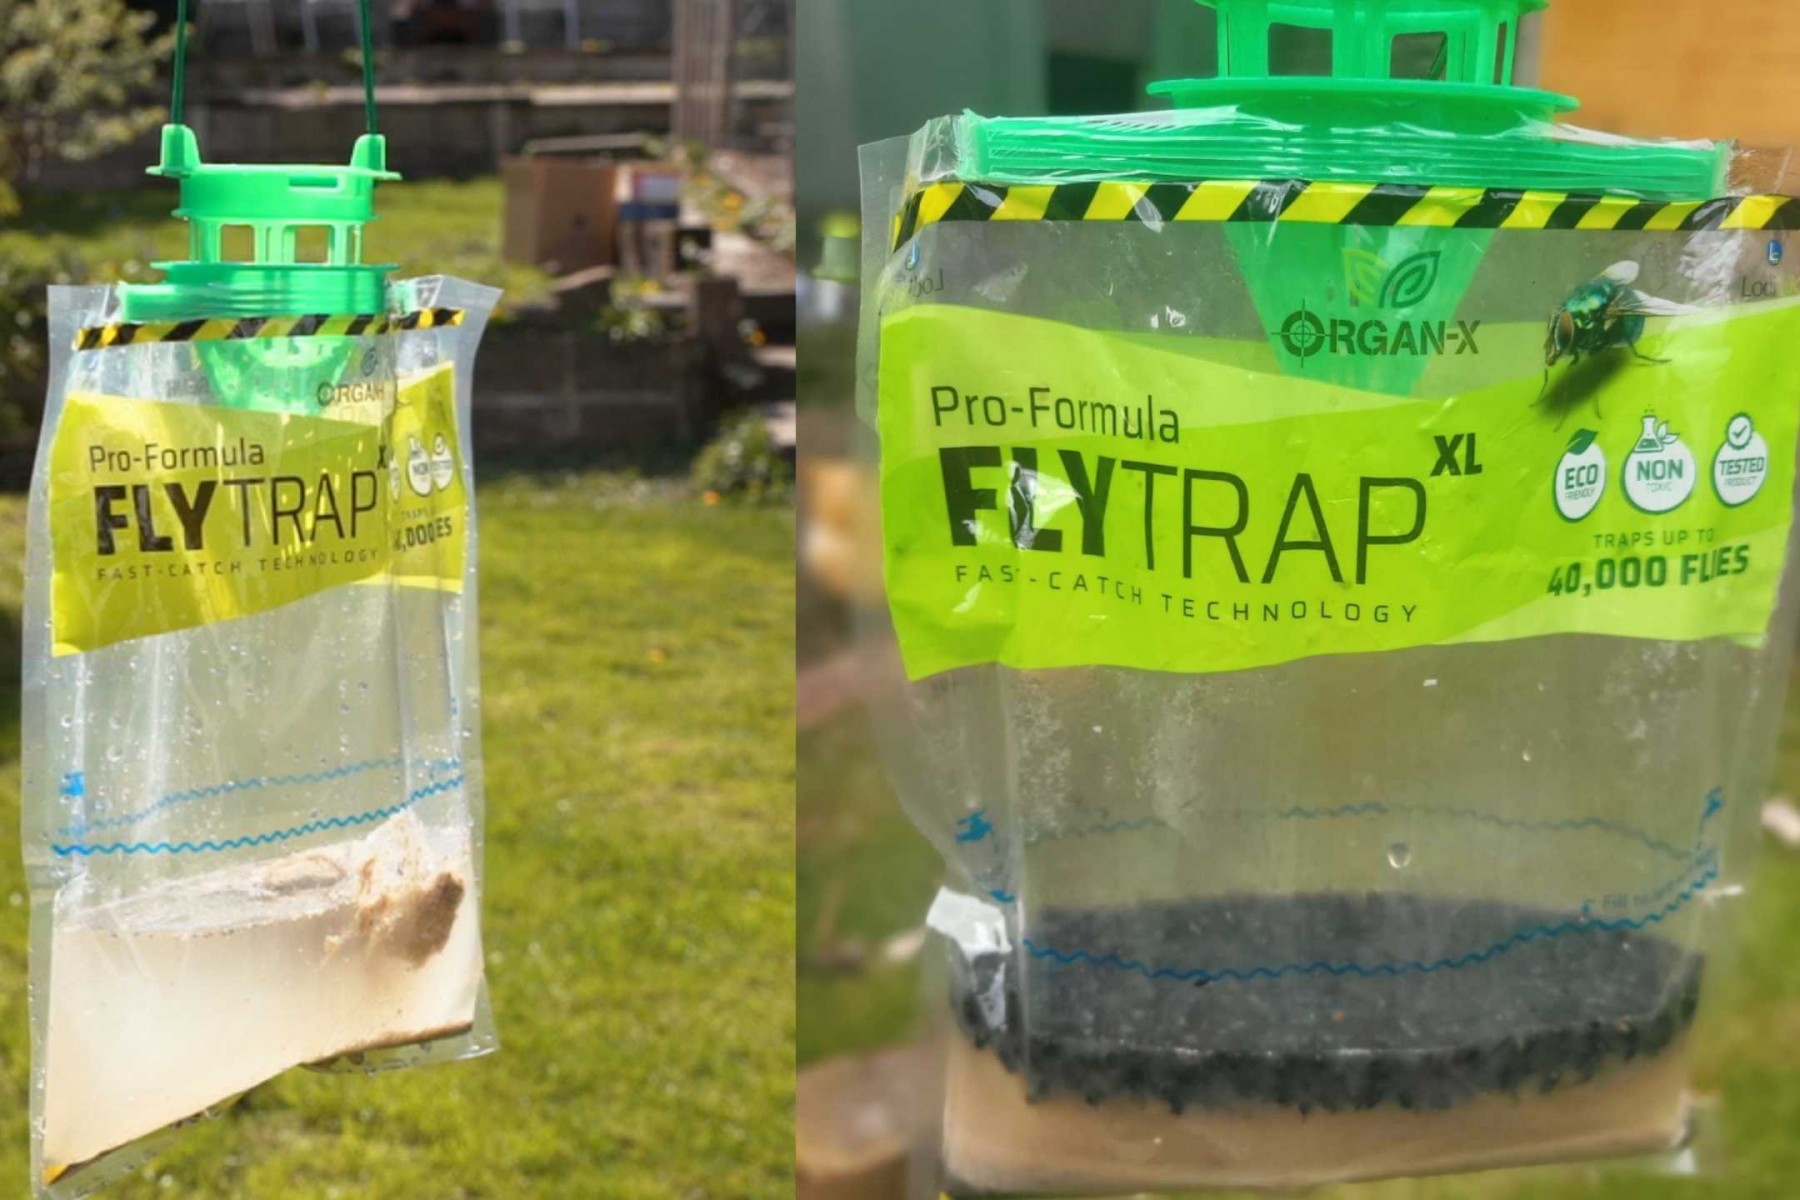 Flybag trap for fly control